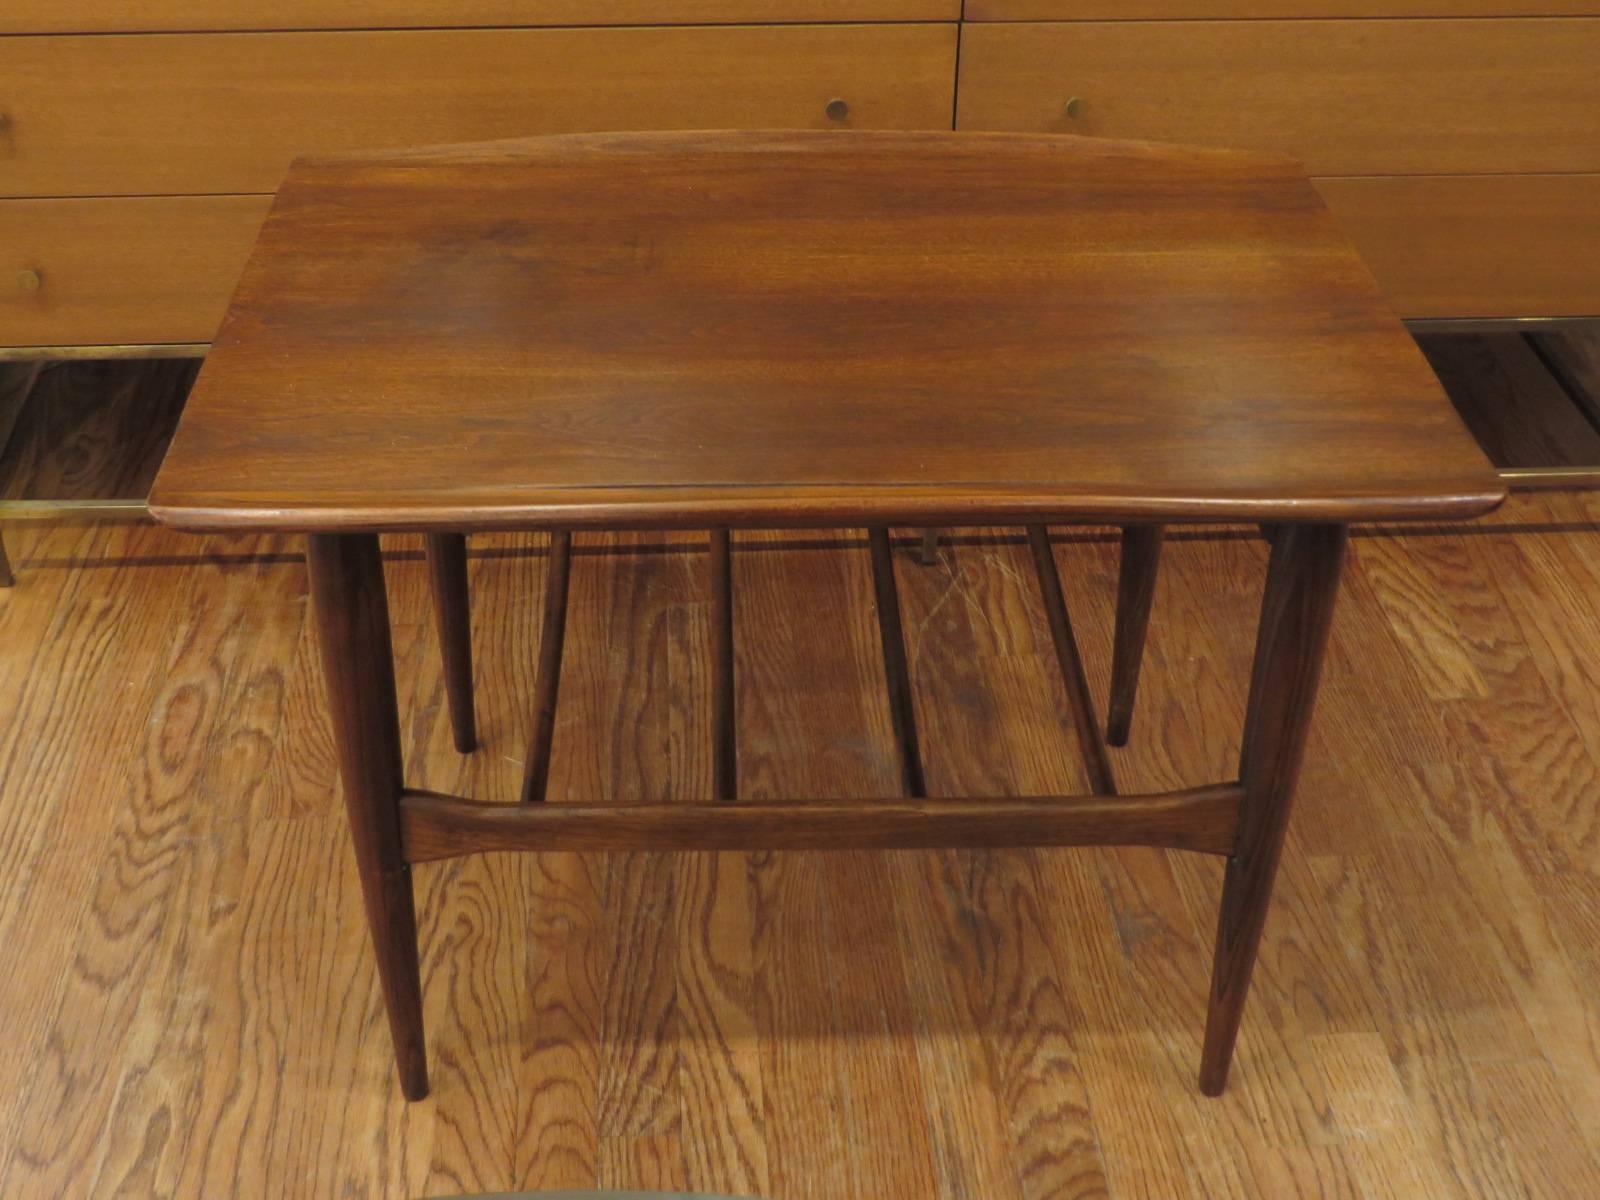 Kip Stewart Walnut End Table In Excellent Condition For Sale In Tarrytown, NY